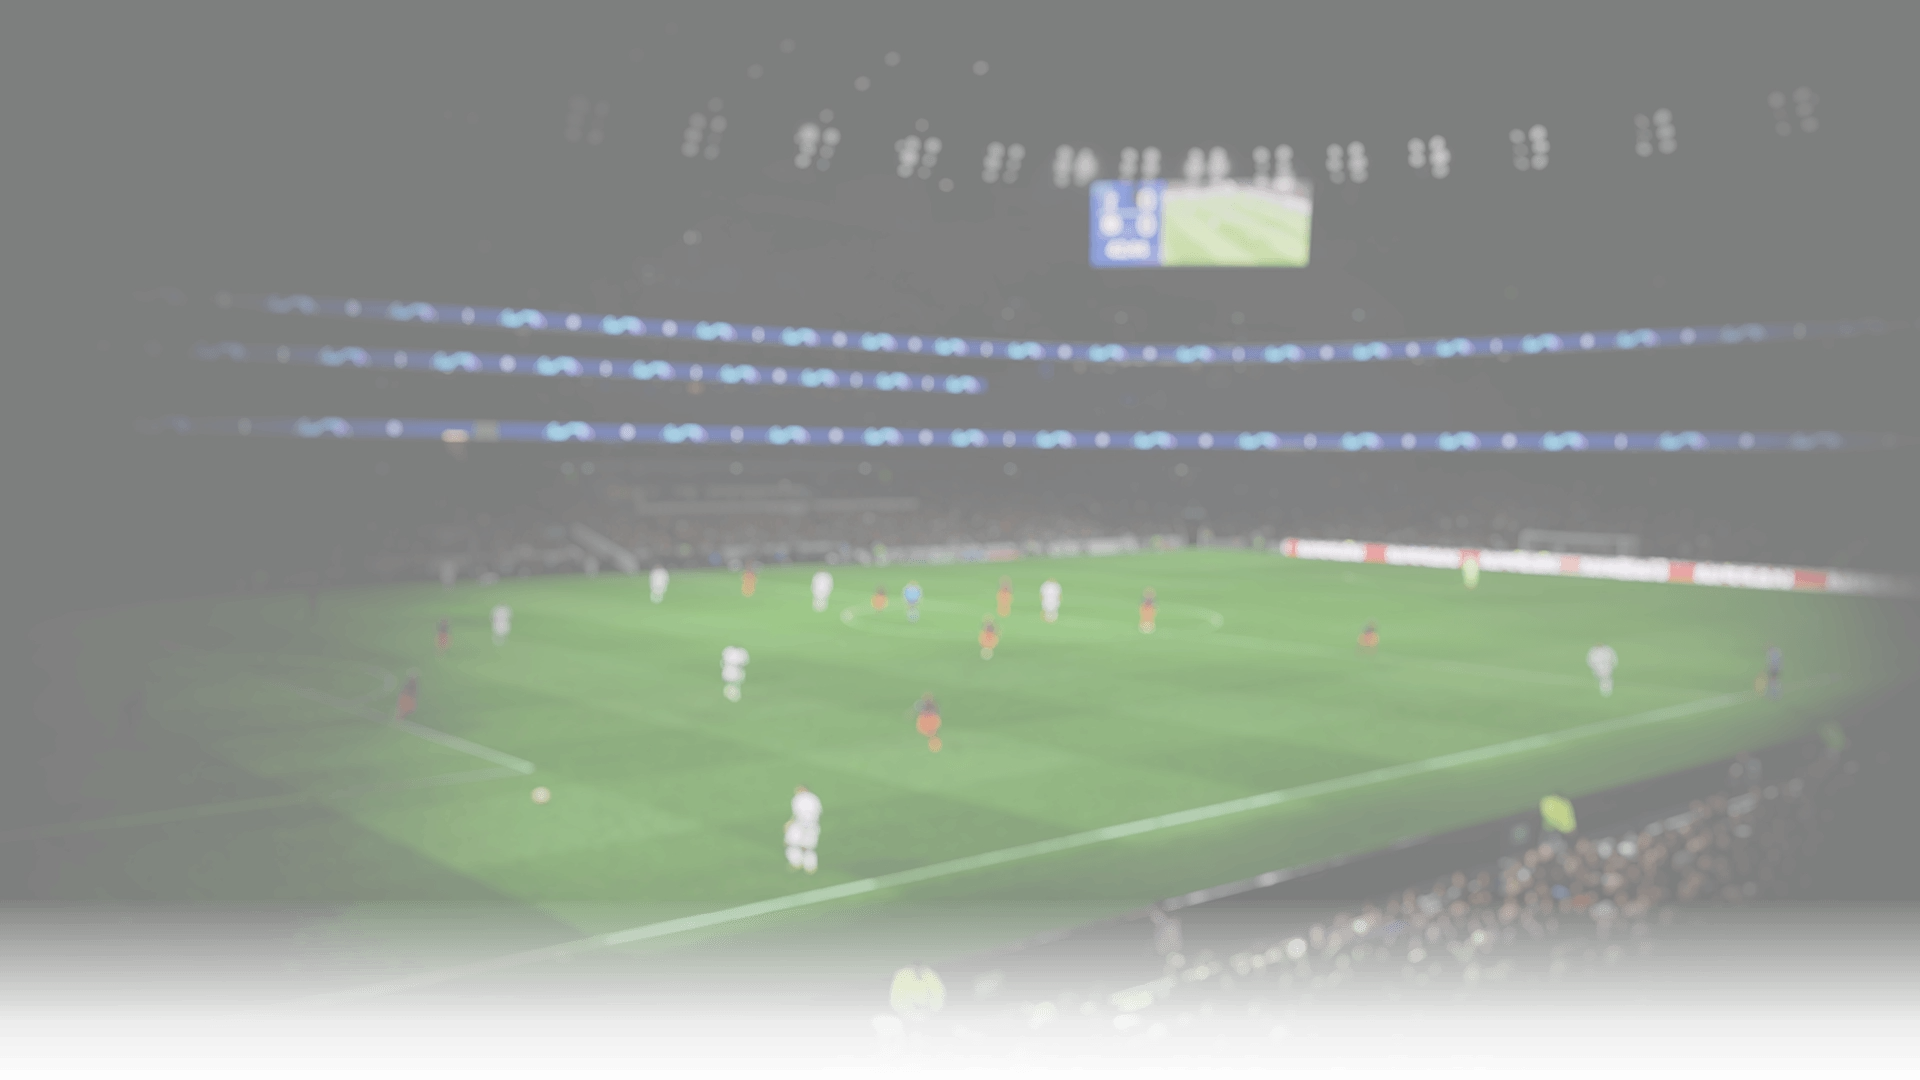 Goal Sport Software Systems for Venue Control in Arenas and Stadiums